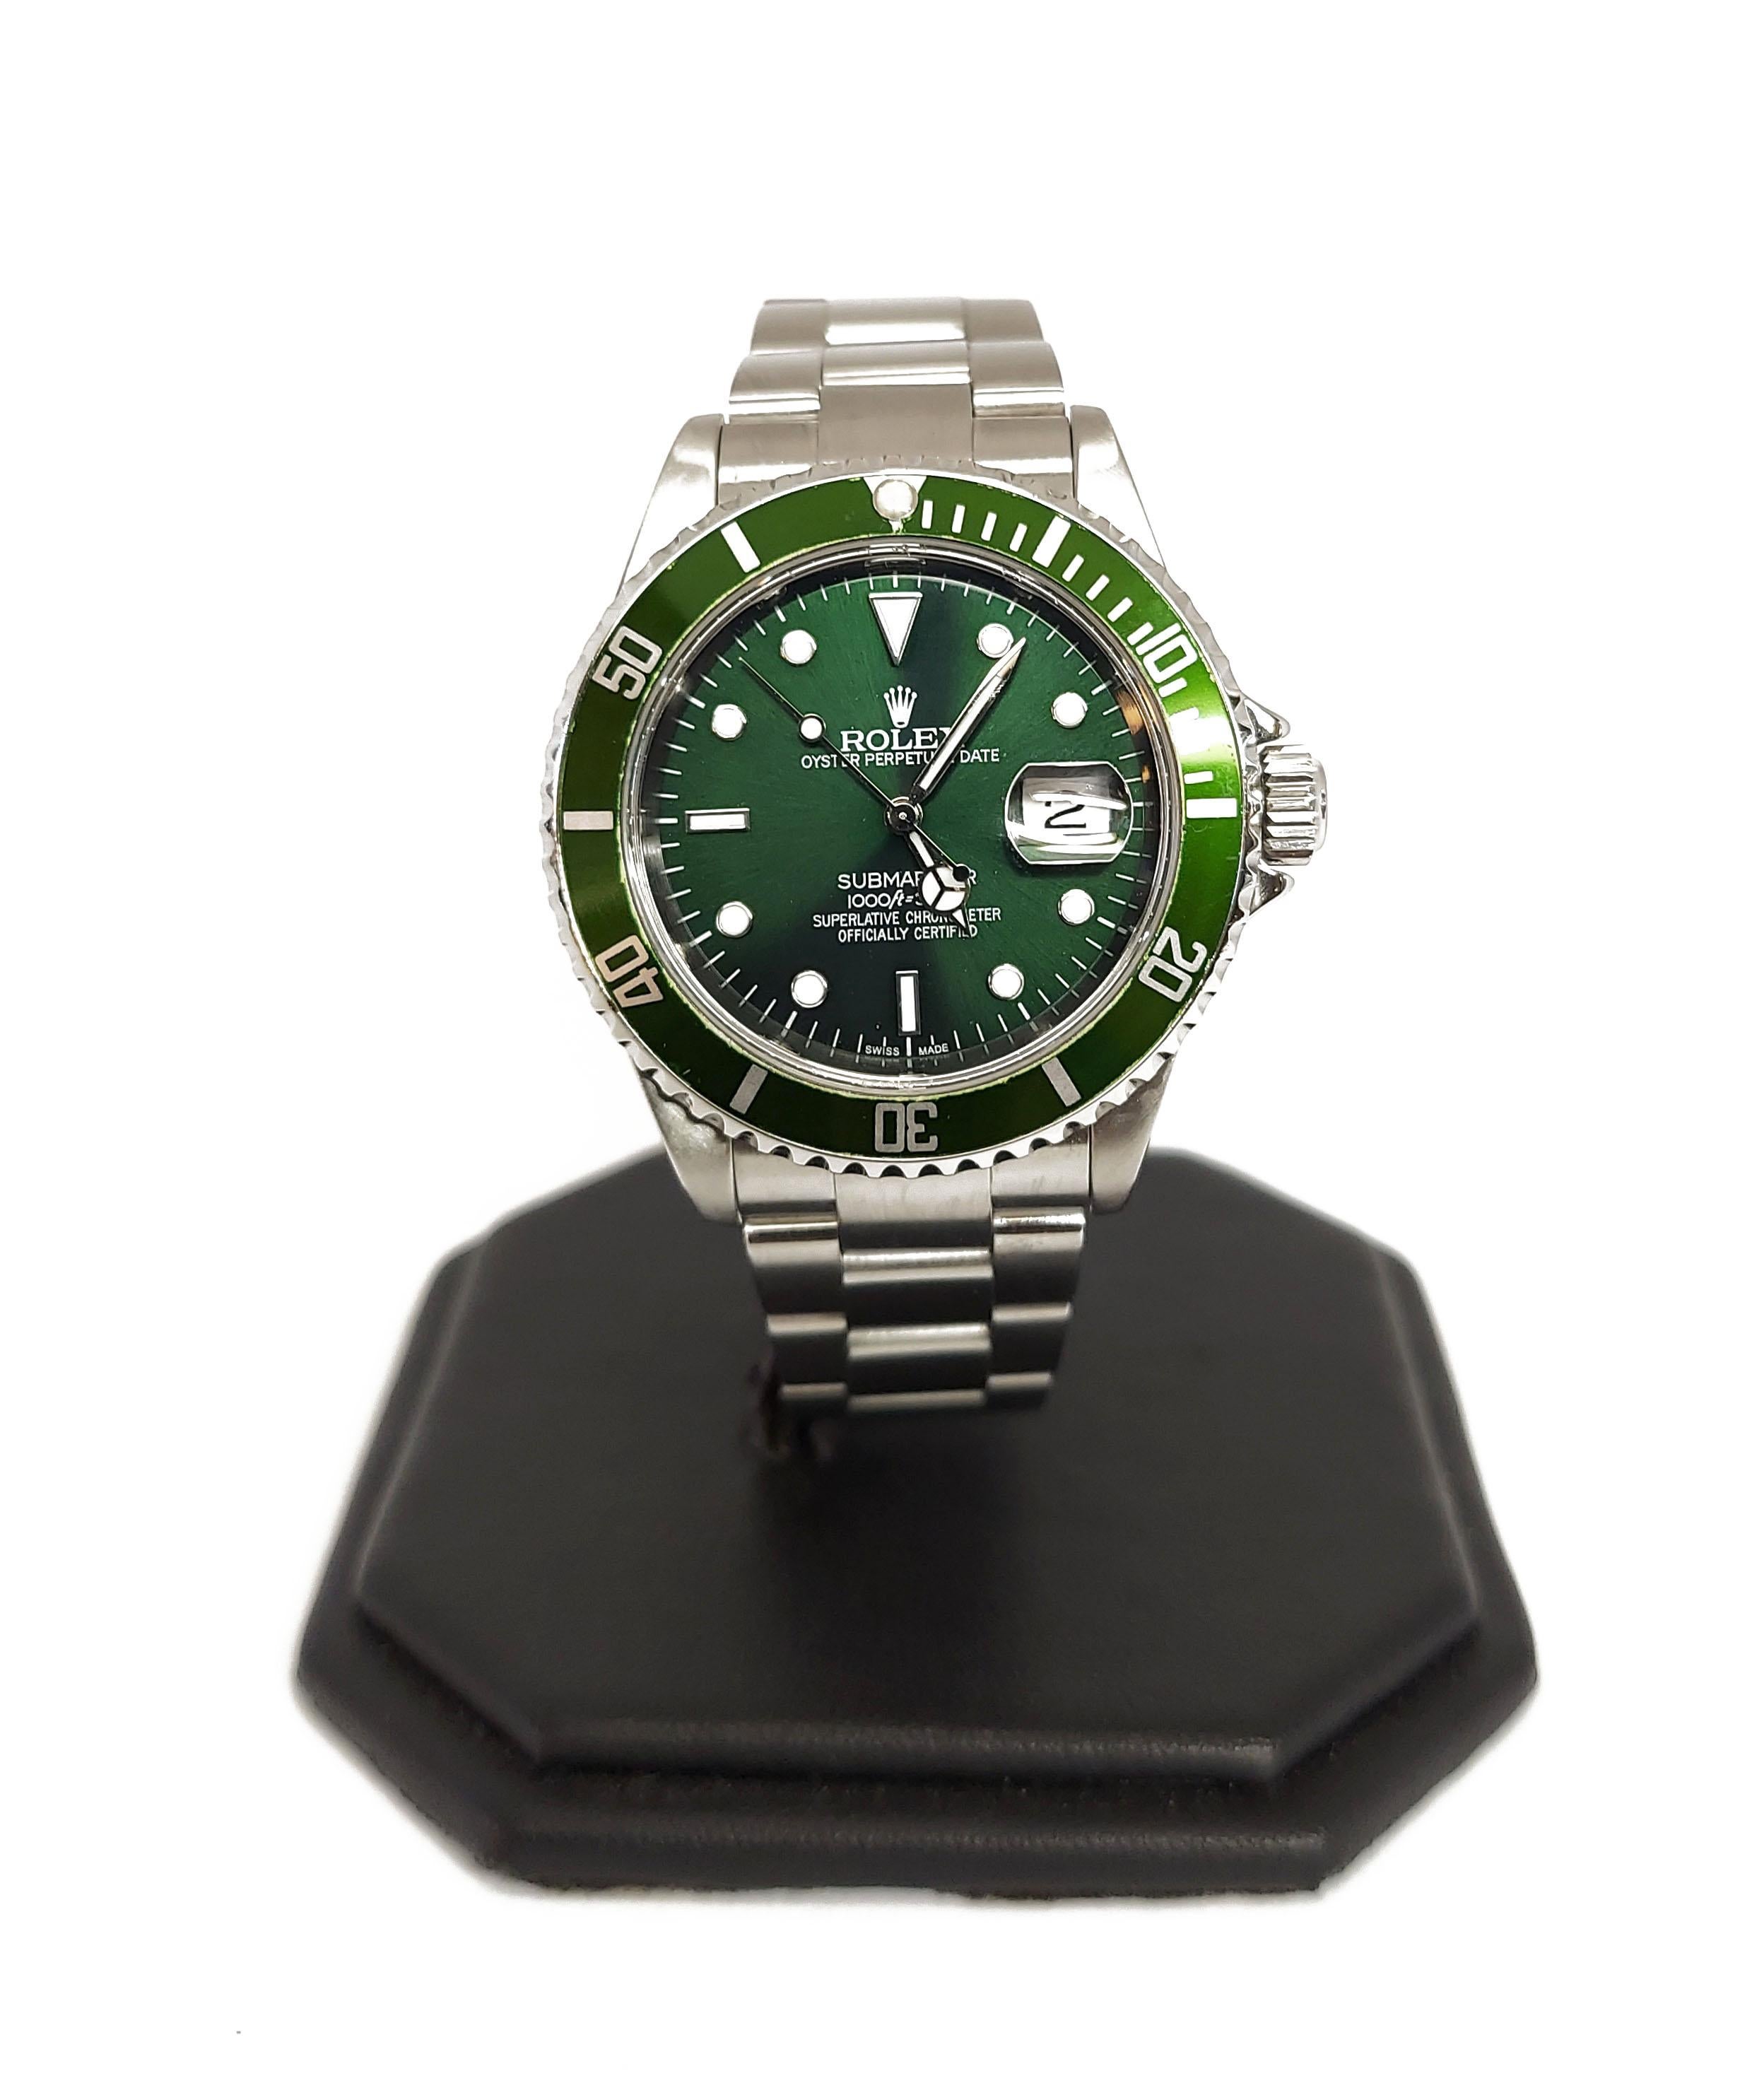 Brand - Rolex
Model - 16610 Submariner
Gender - Men's
Case Size - 40mm
Dial - Refinished Green
Bezel - Steel Green 
Crystal - Saphire
Movement - Automatic Rolex CAL.3135
Band - Steel Oyster
Wrist Size - 8 Inches